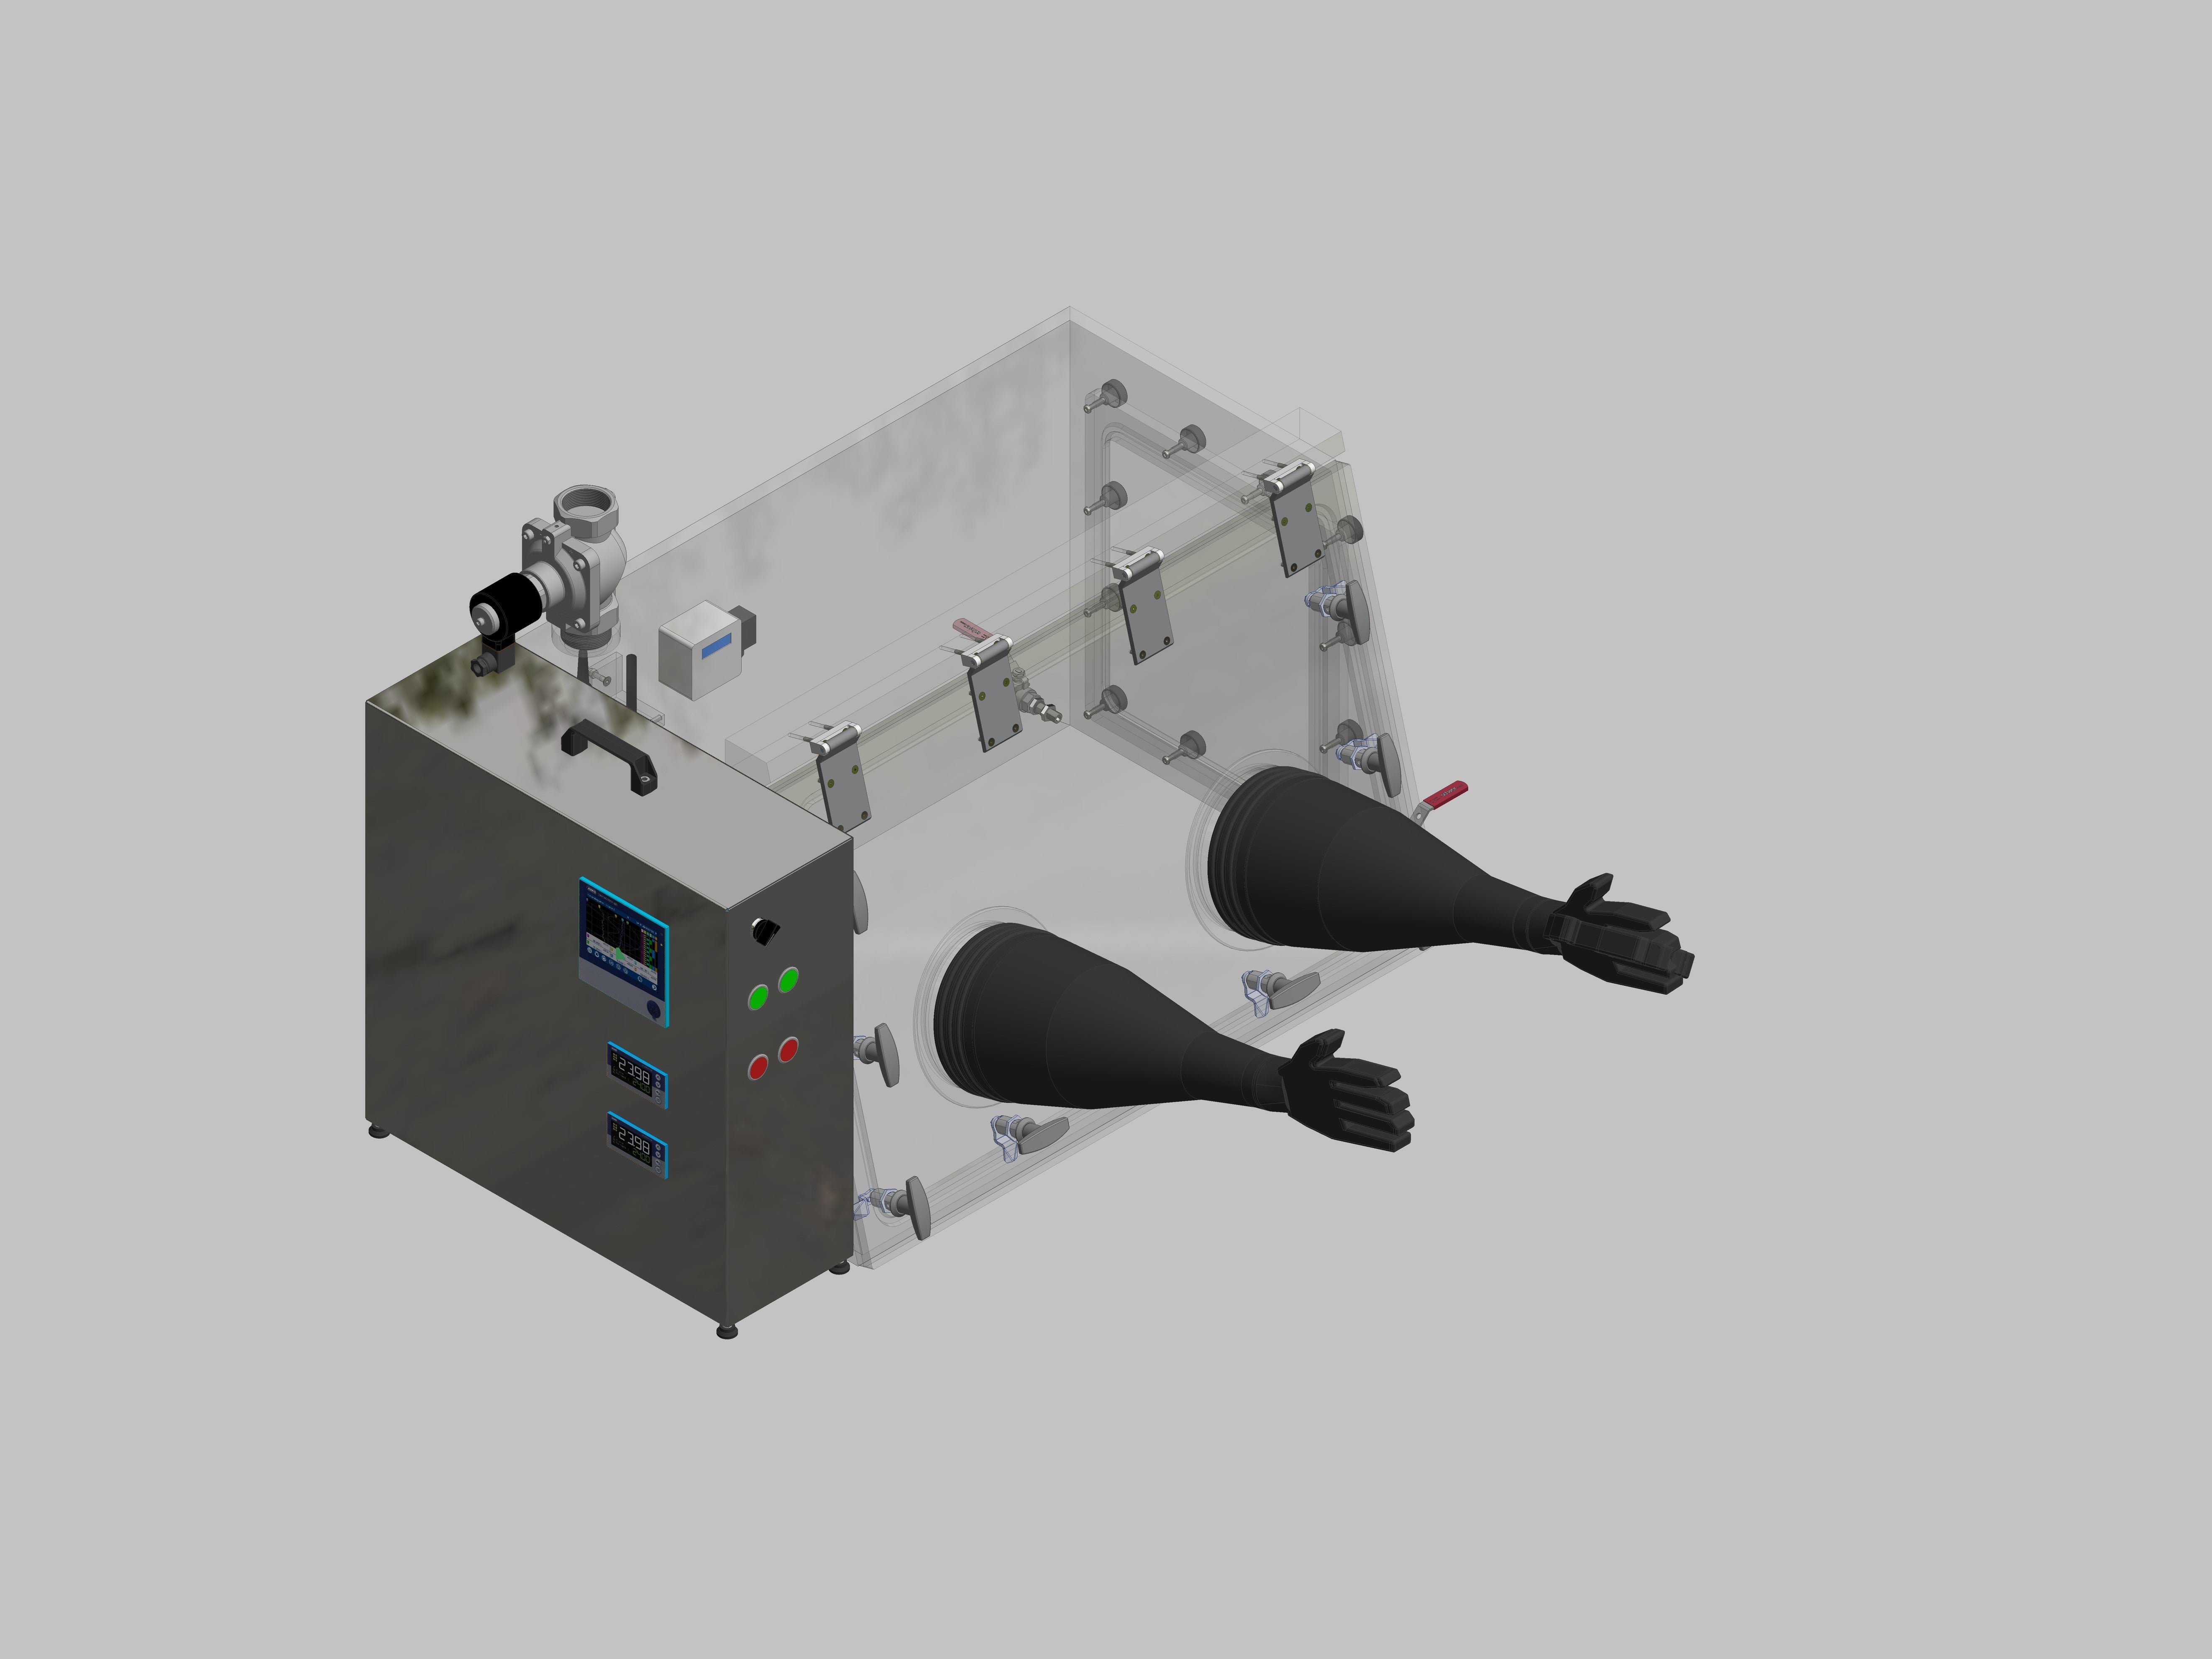 Glovebox made of acrylic&gt; Gas filling: automatic flushing with pressure control, front design: swivels upwards, side design: removable flange Control: humidity controller and oxygen display with data logger